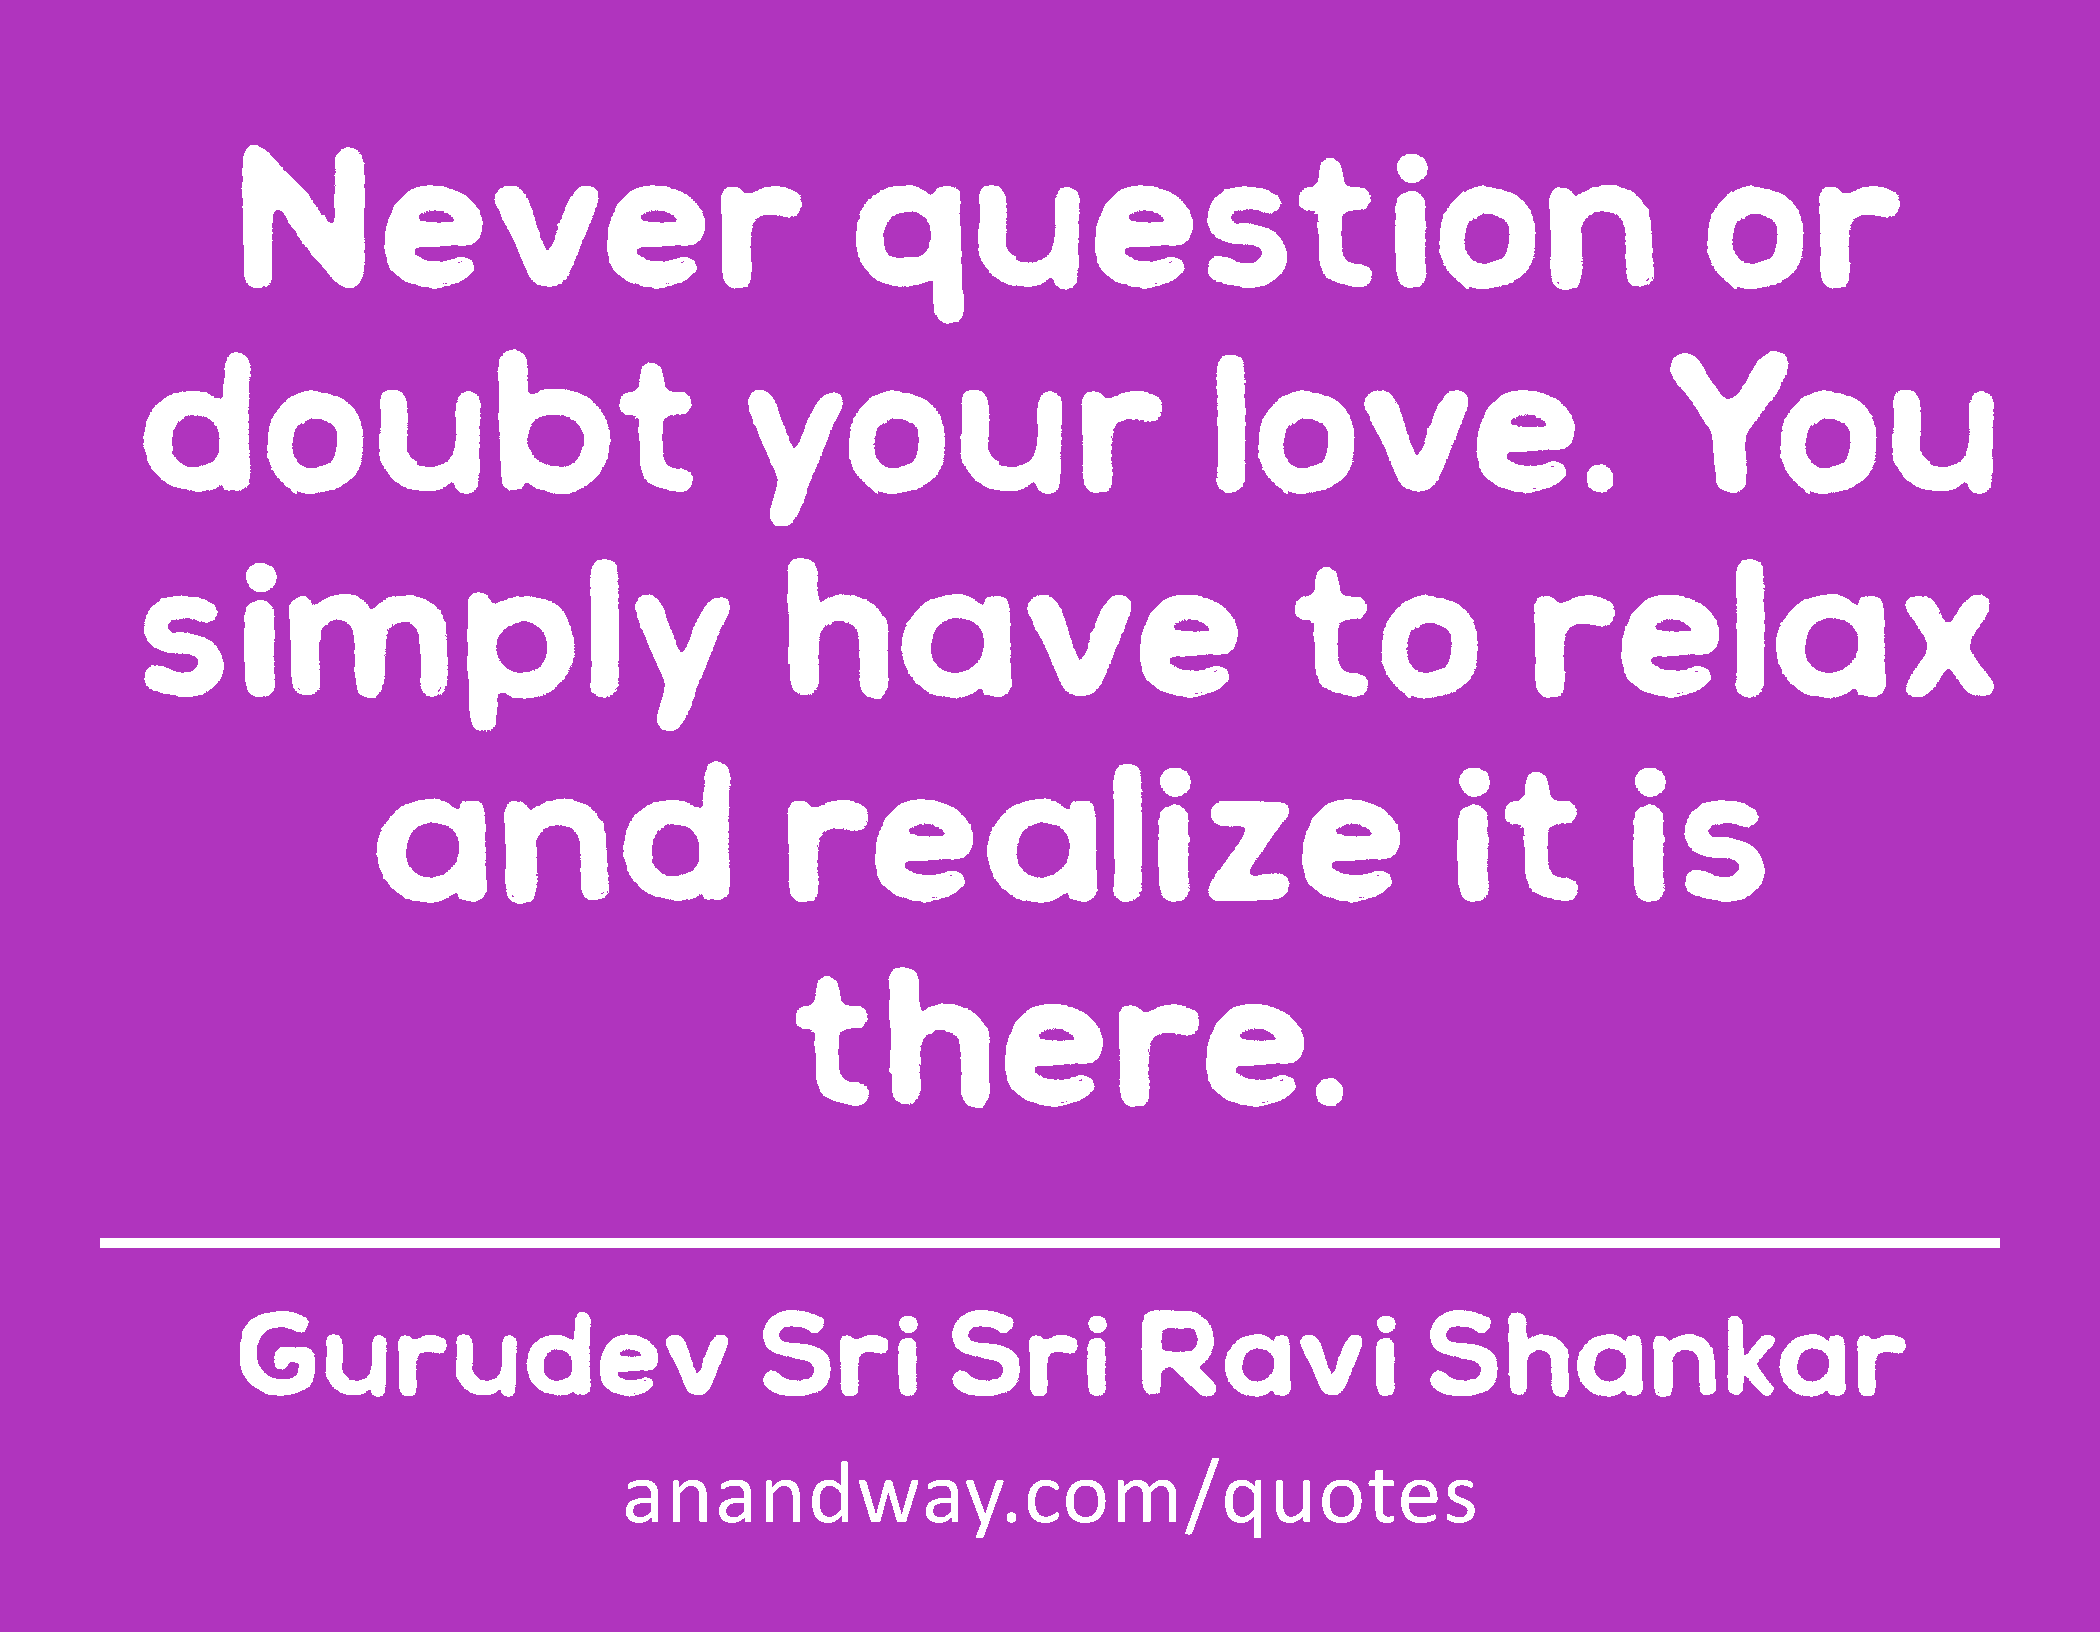 Never question or doubt your love. You simply have to relax and realize it is there. 
 -Gurudev Sri Sri Ravi Shankar